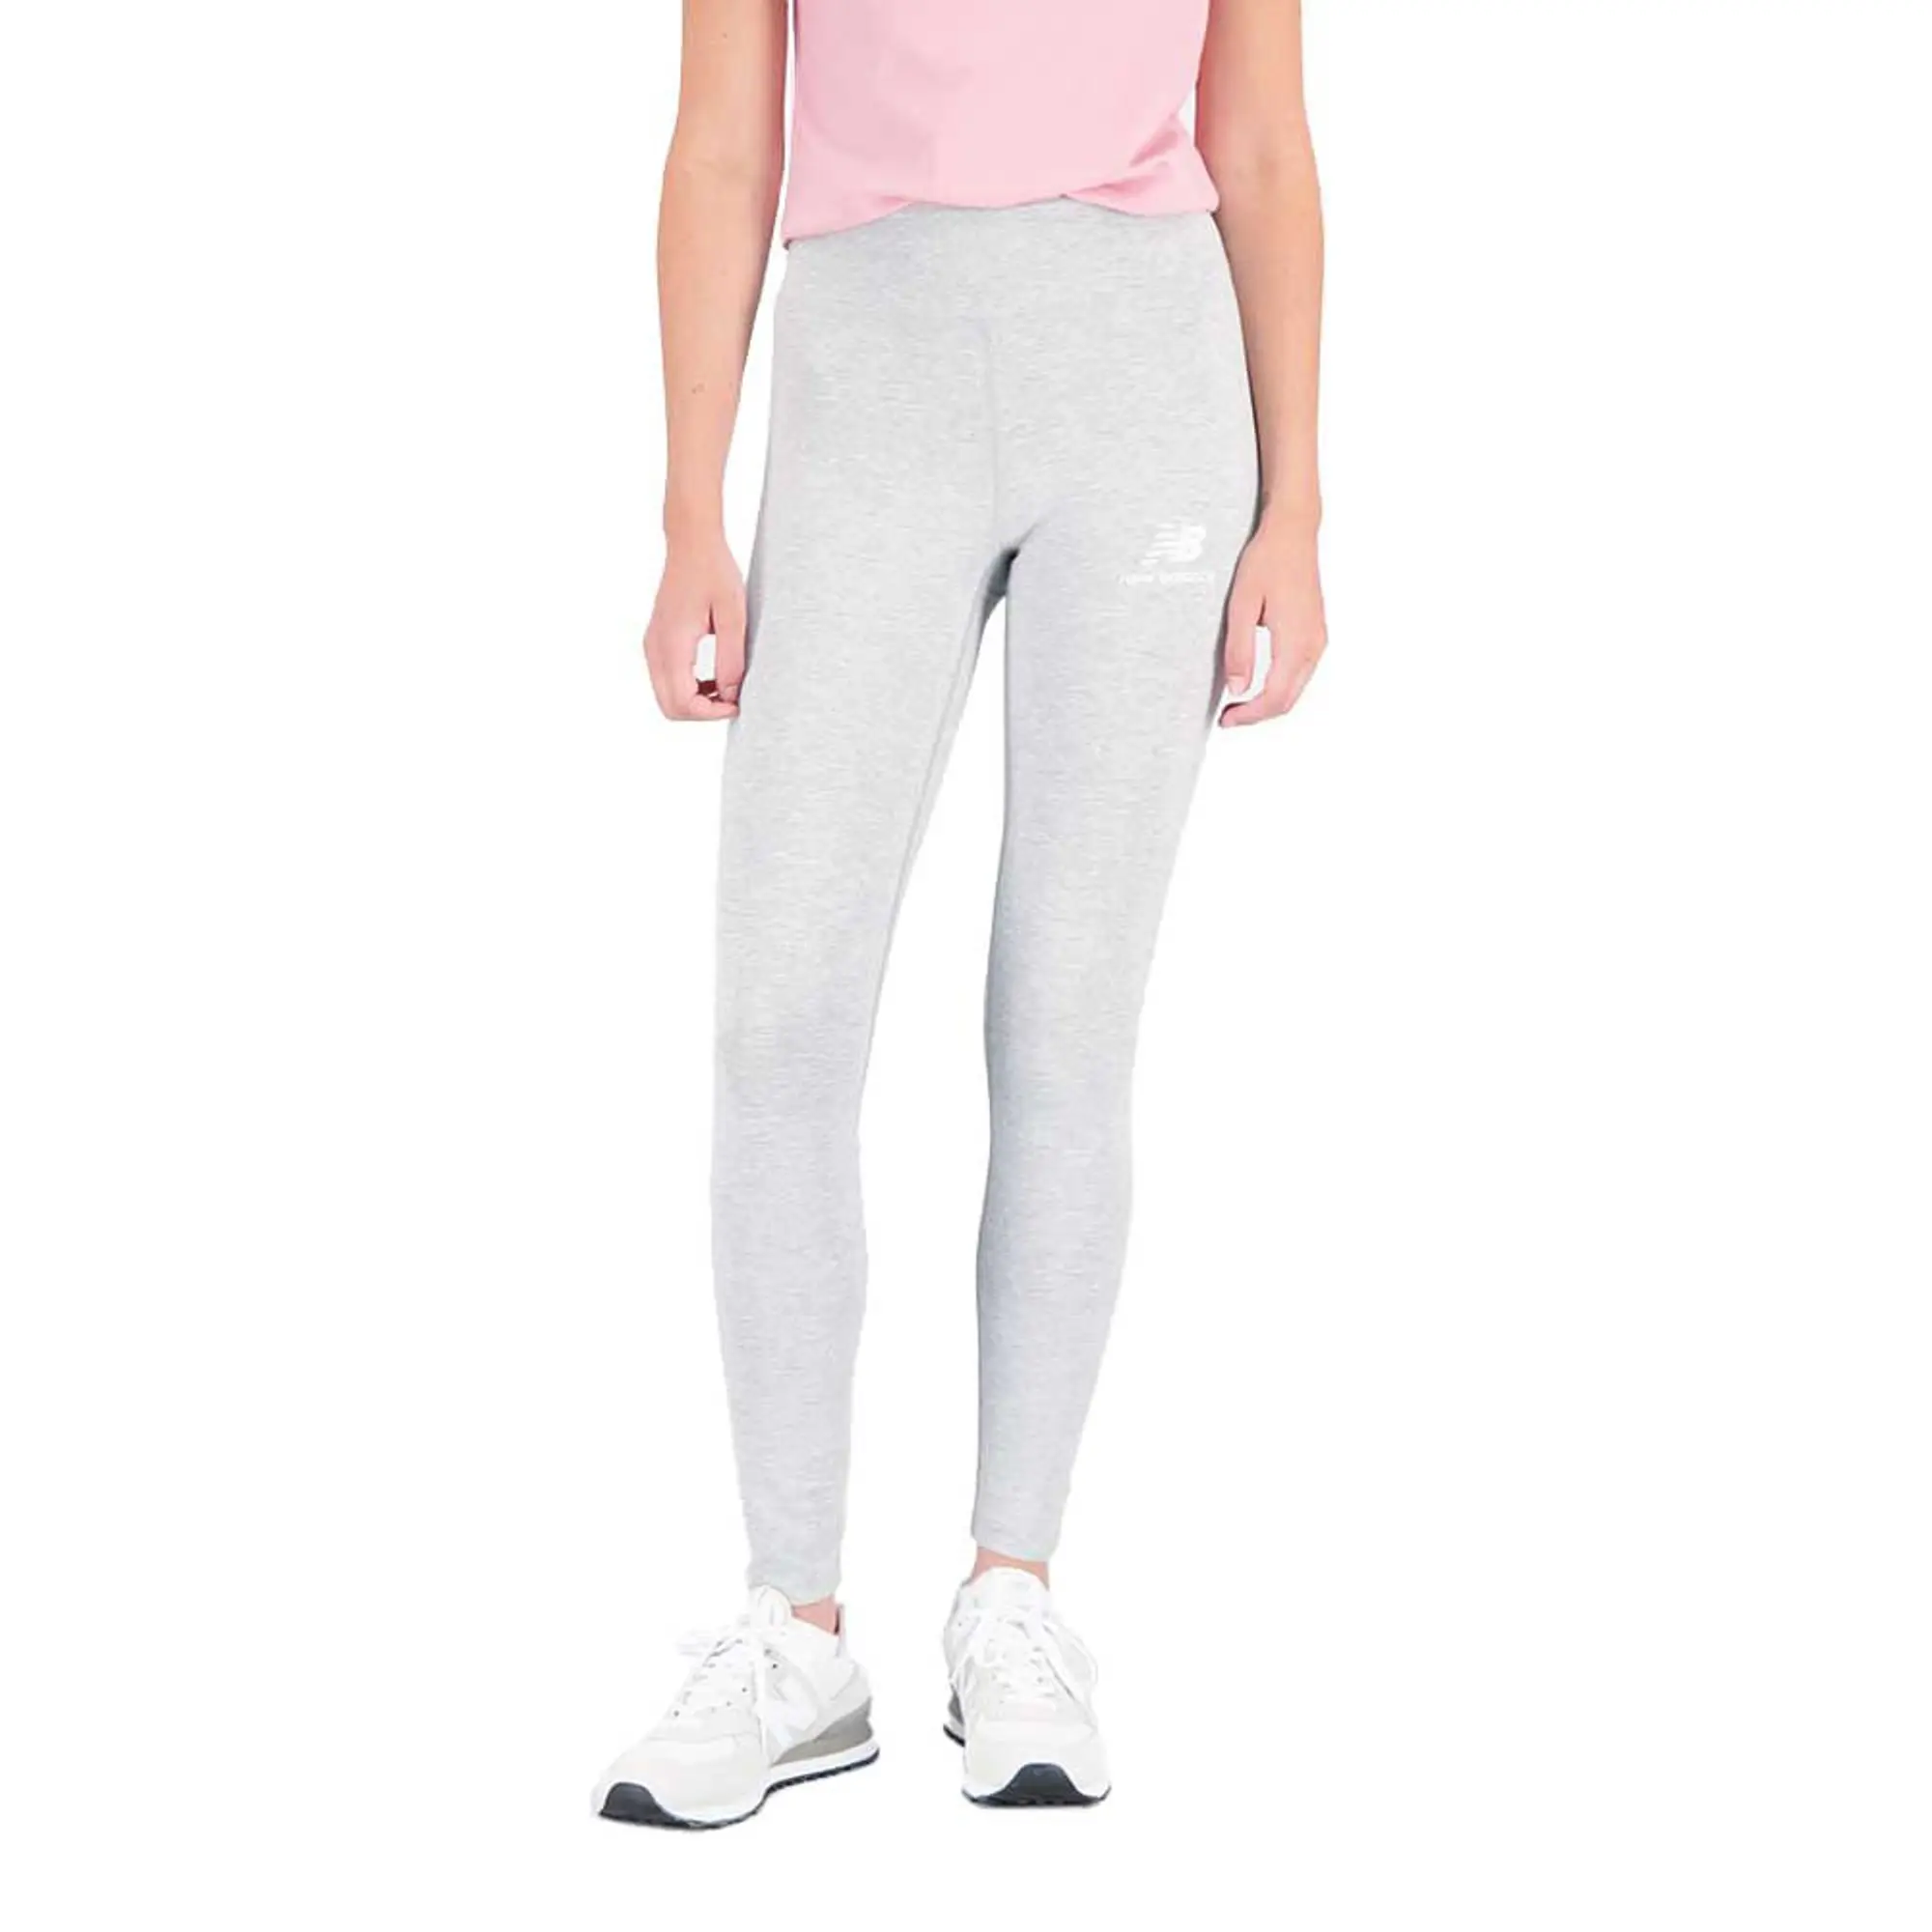 Check Out the New Balance Essentials Stacked Logo Cotton Leggings, WP31509AG